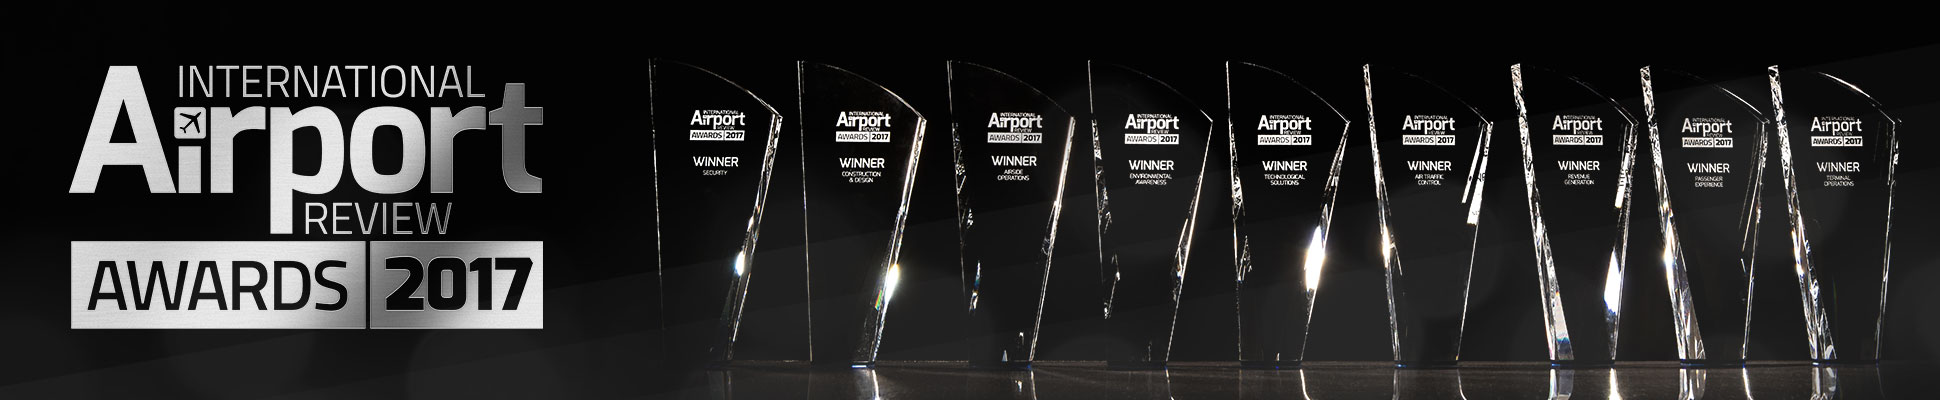 International Airport Review Awards 2017 - Winners Announced